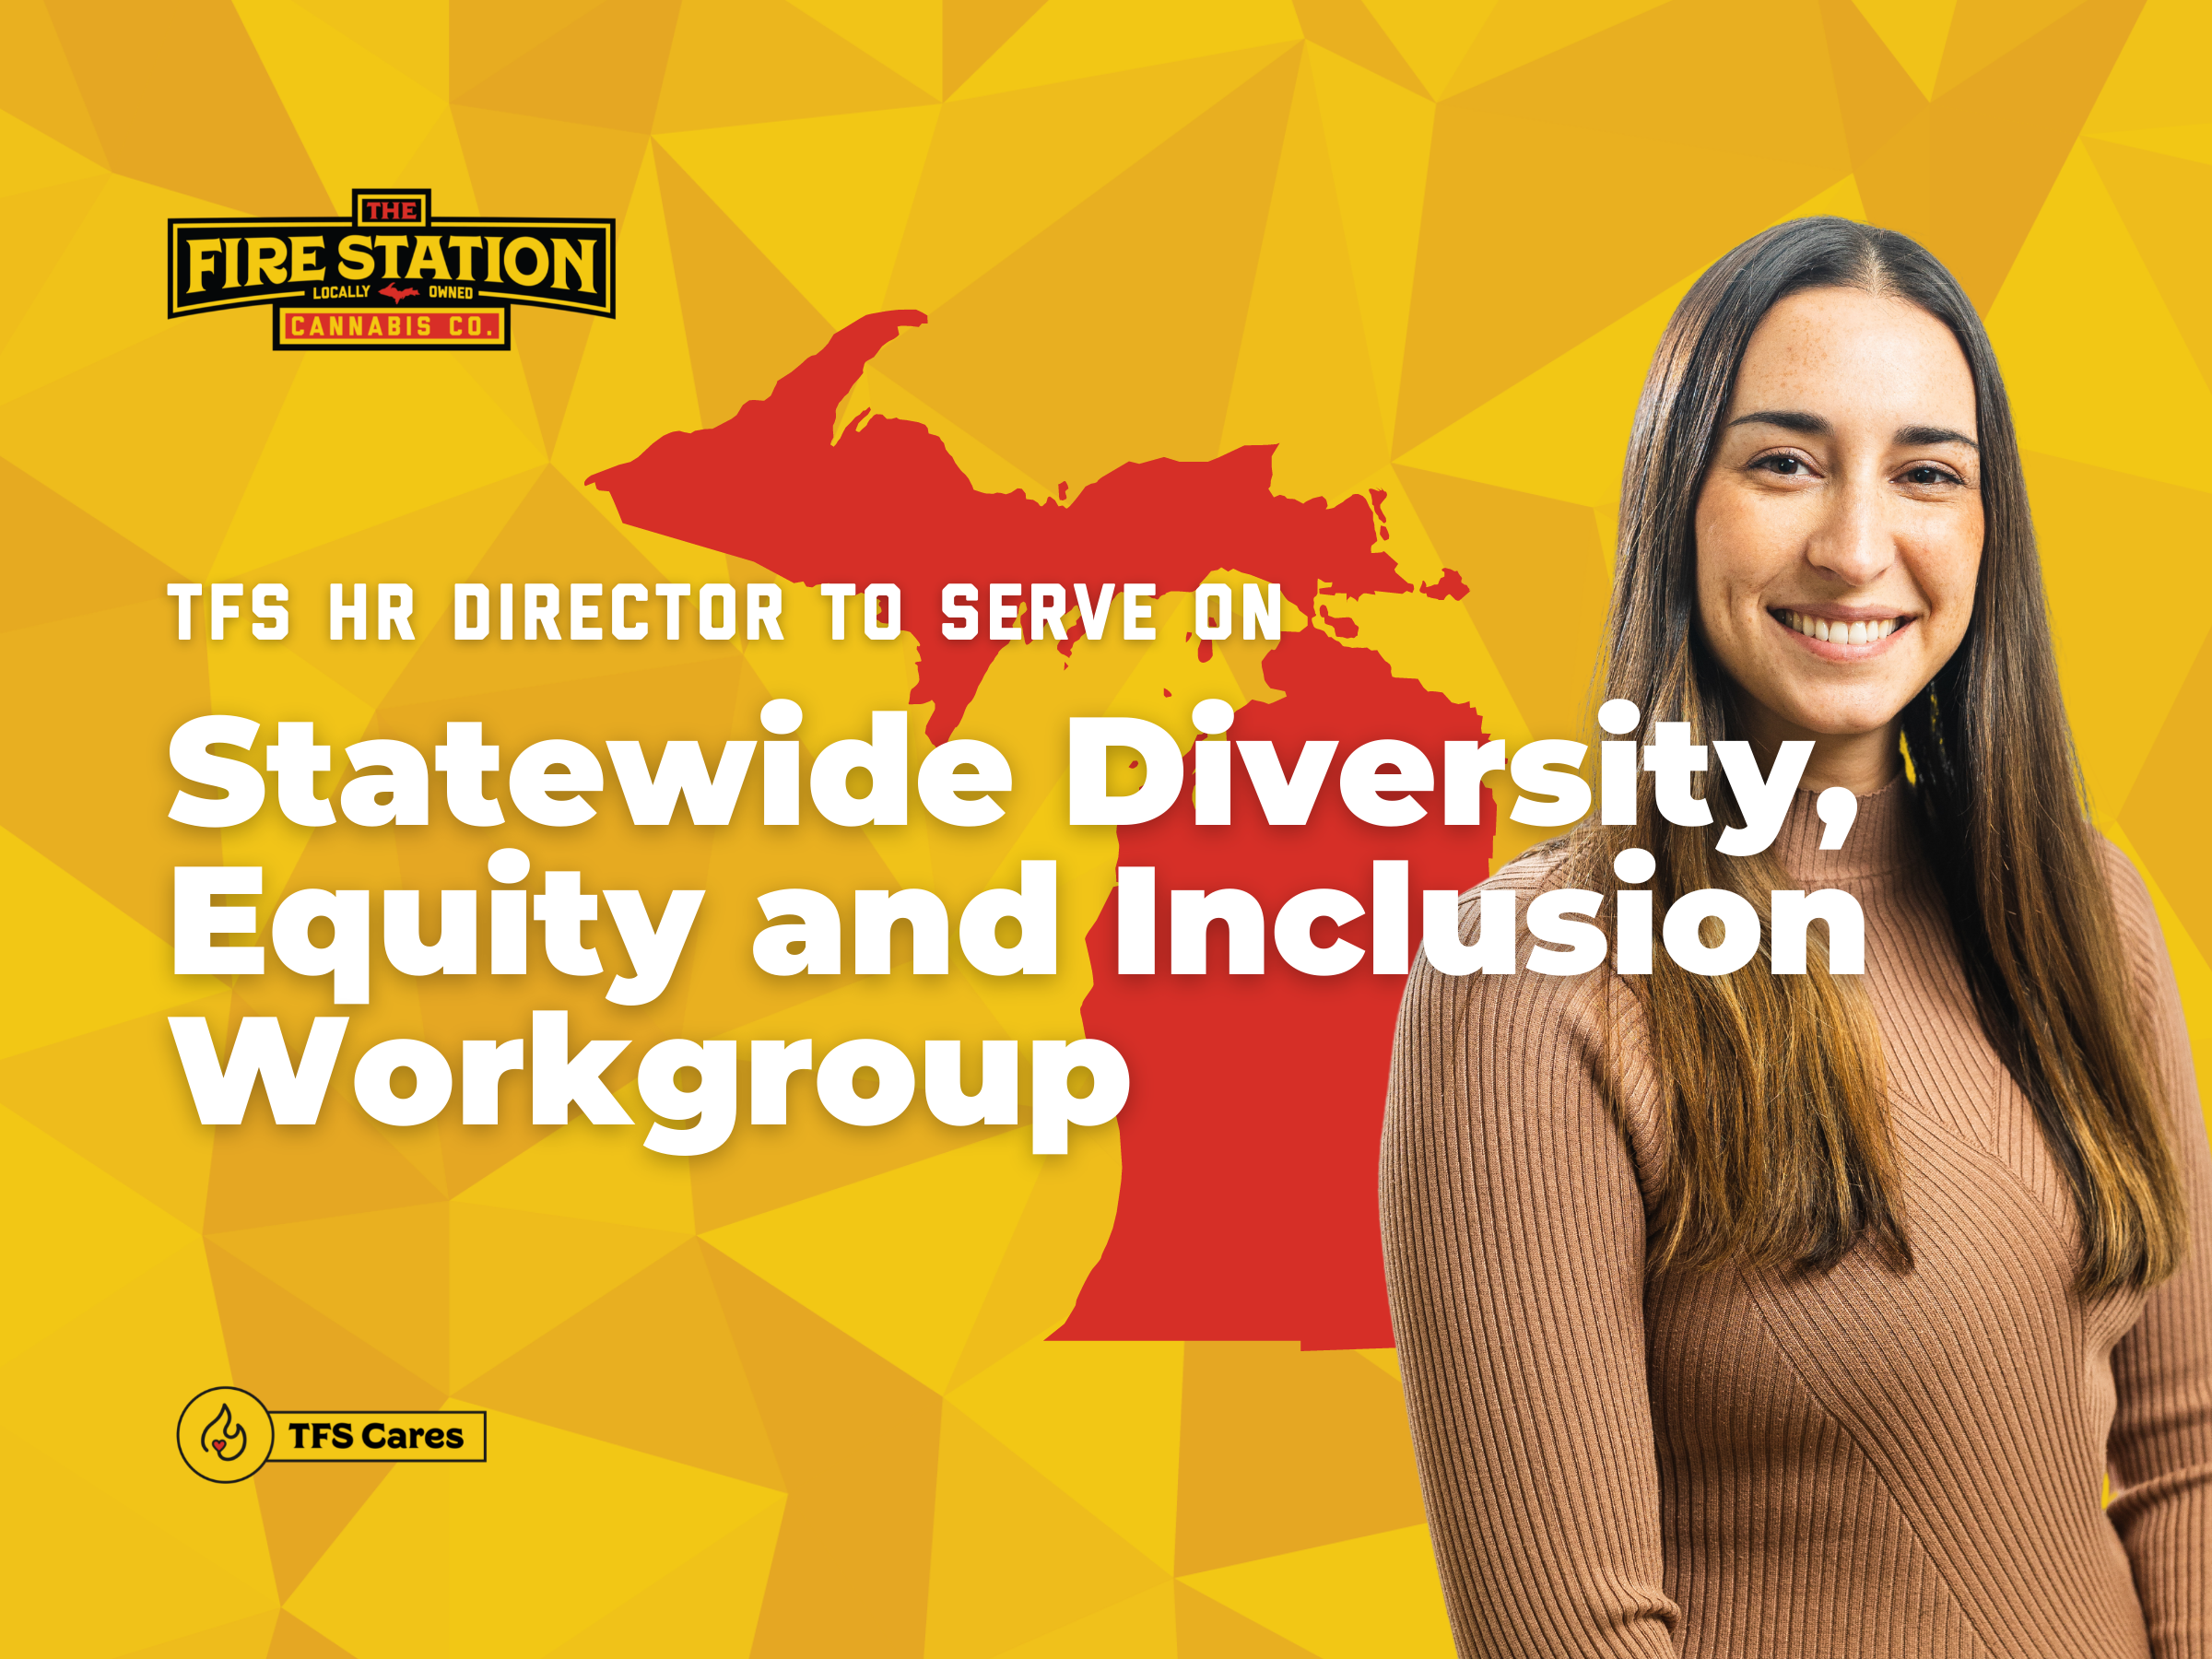 TFS HR Director to Serve on Statewide Diversity, Equity and Inclusion Workgroup